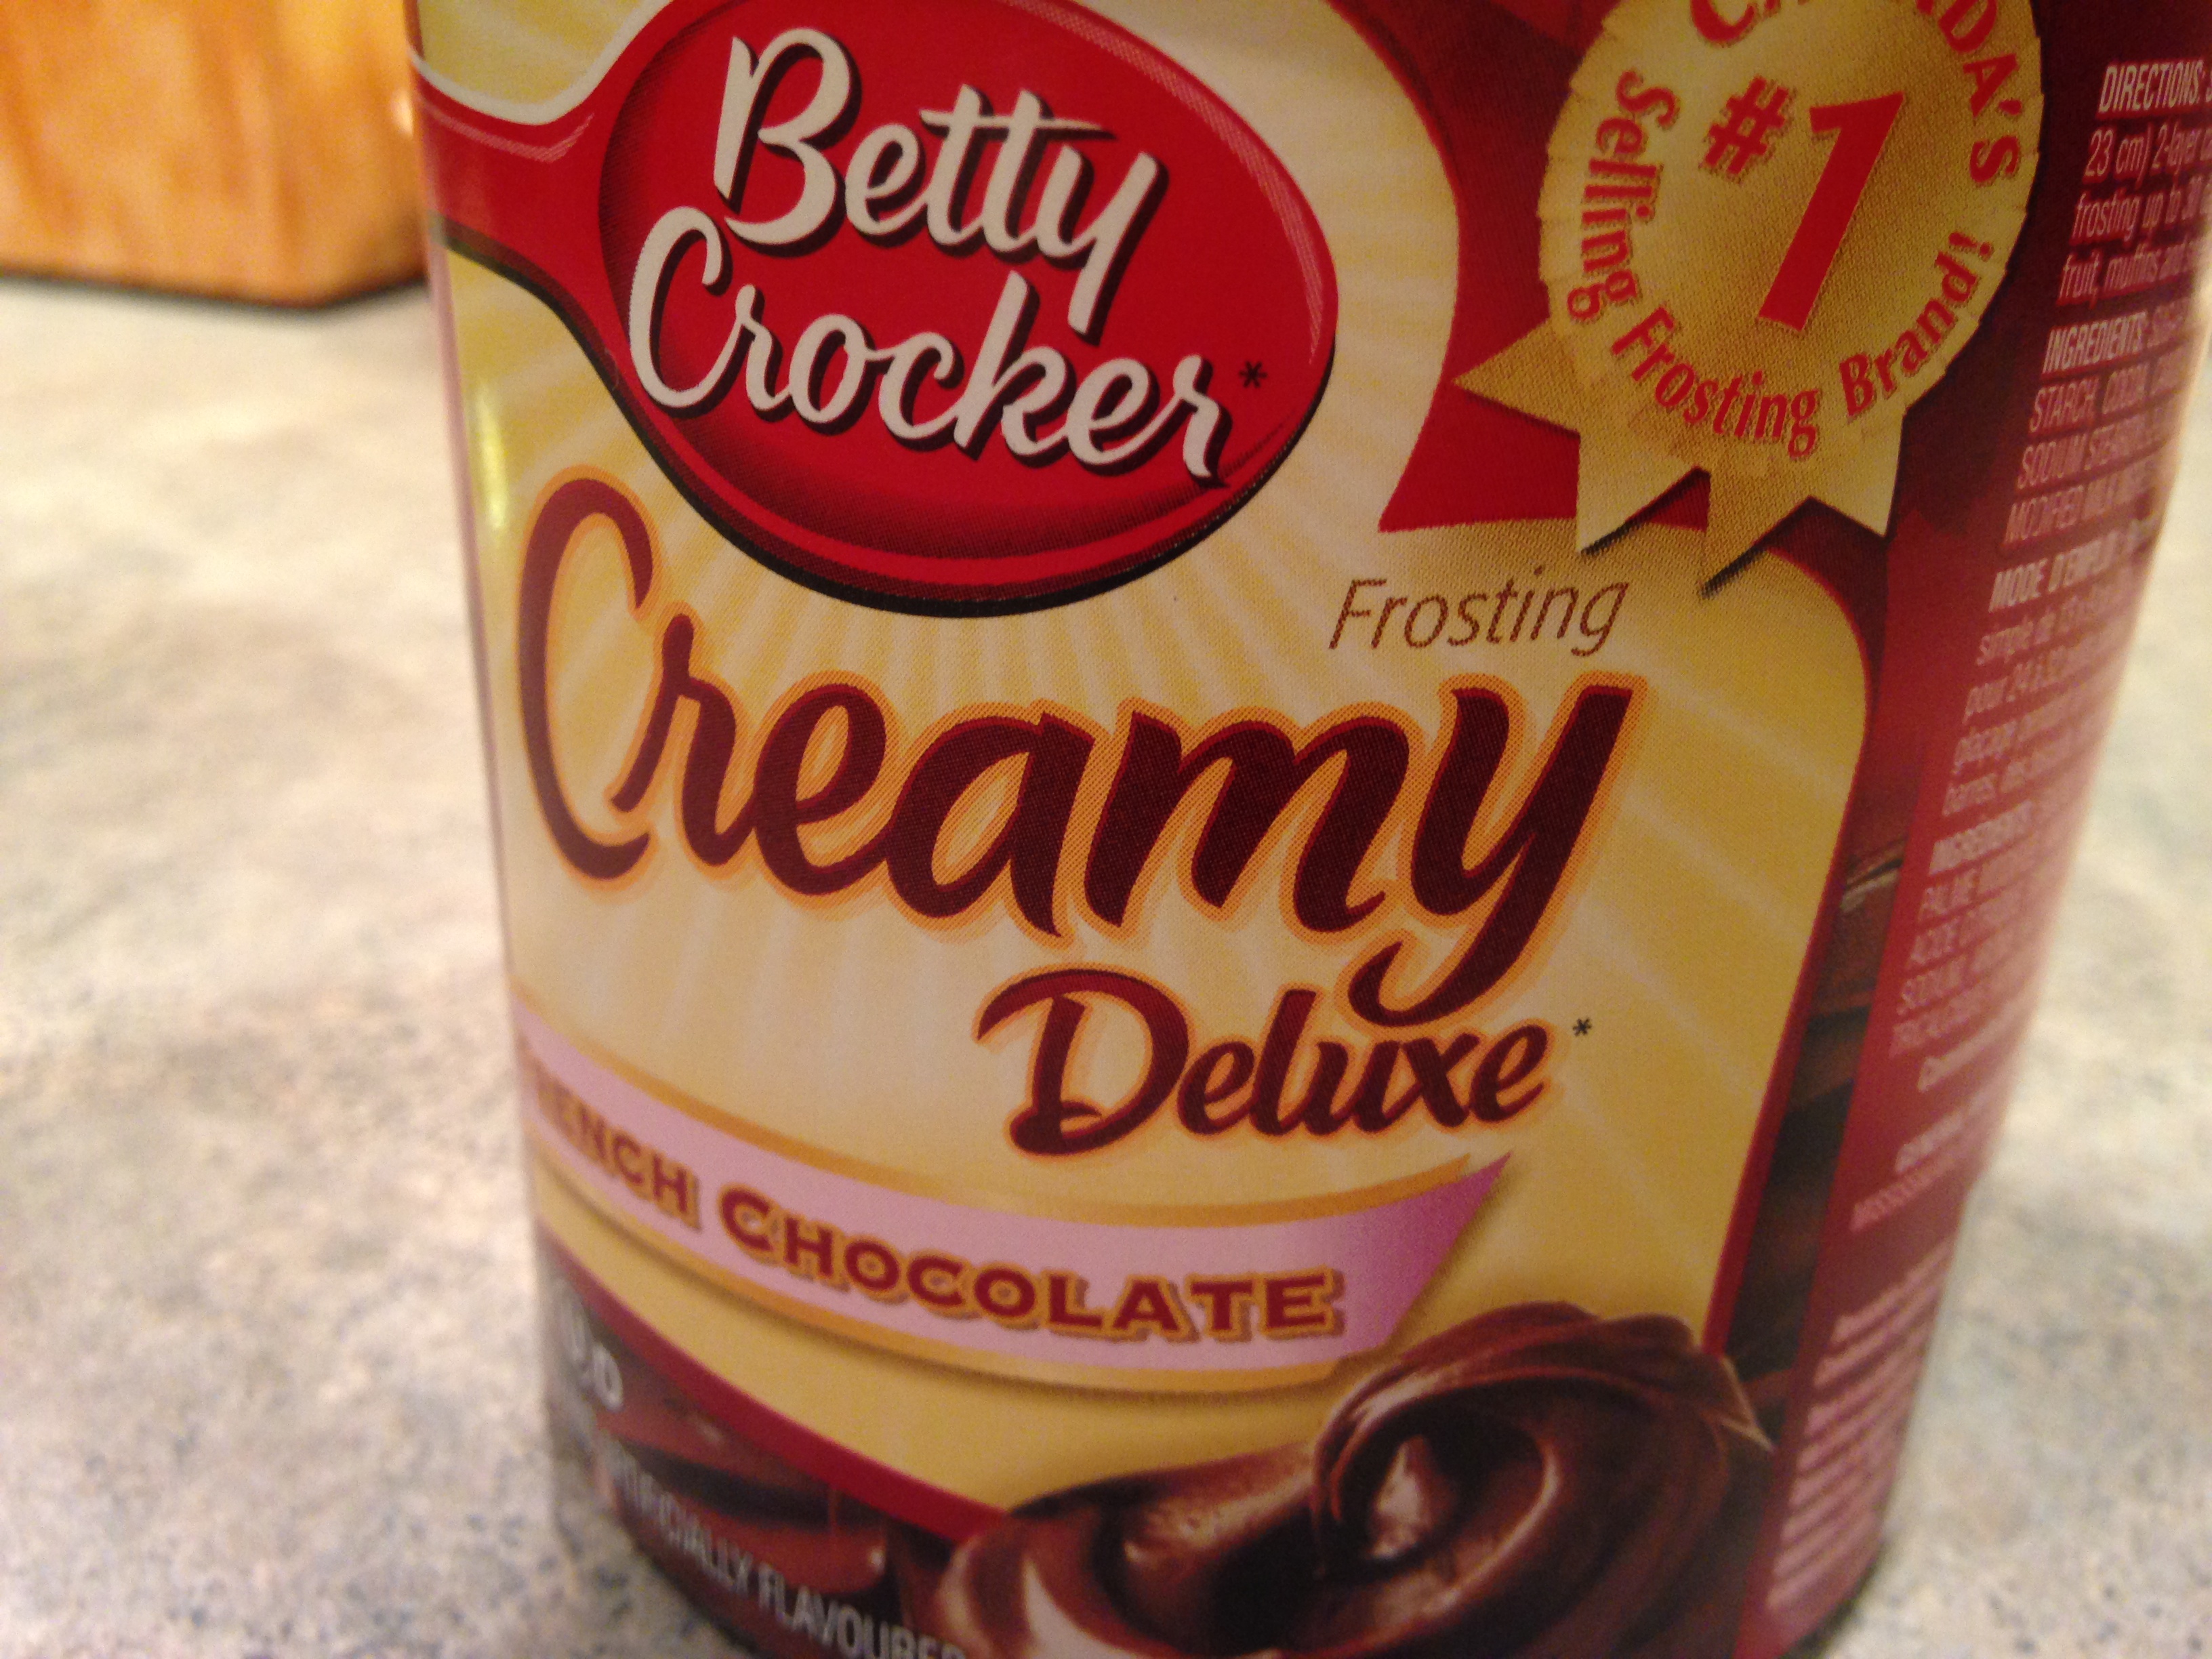 GF Product Review: Betty Crocker Frosting - The GF BFF